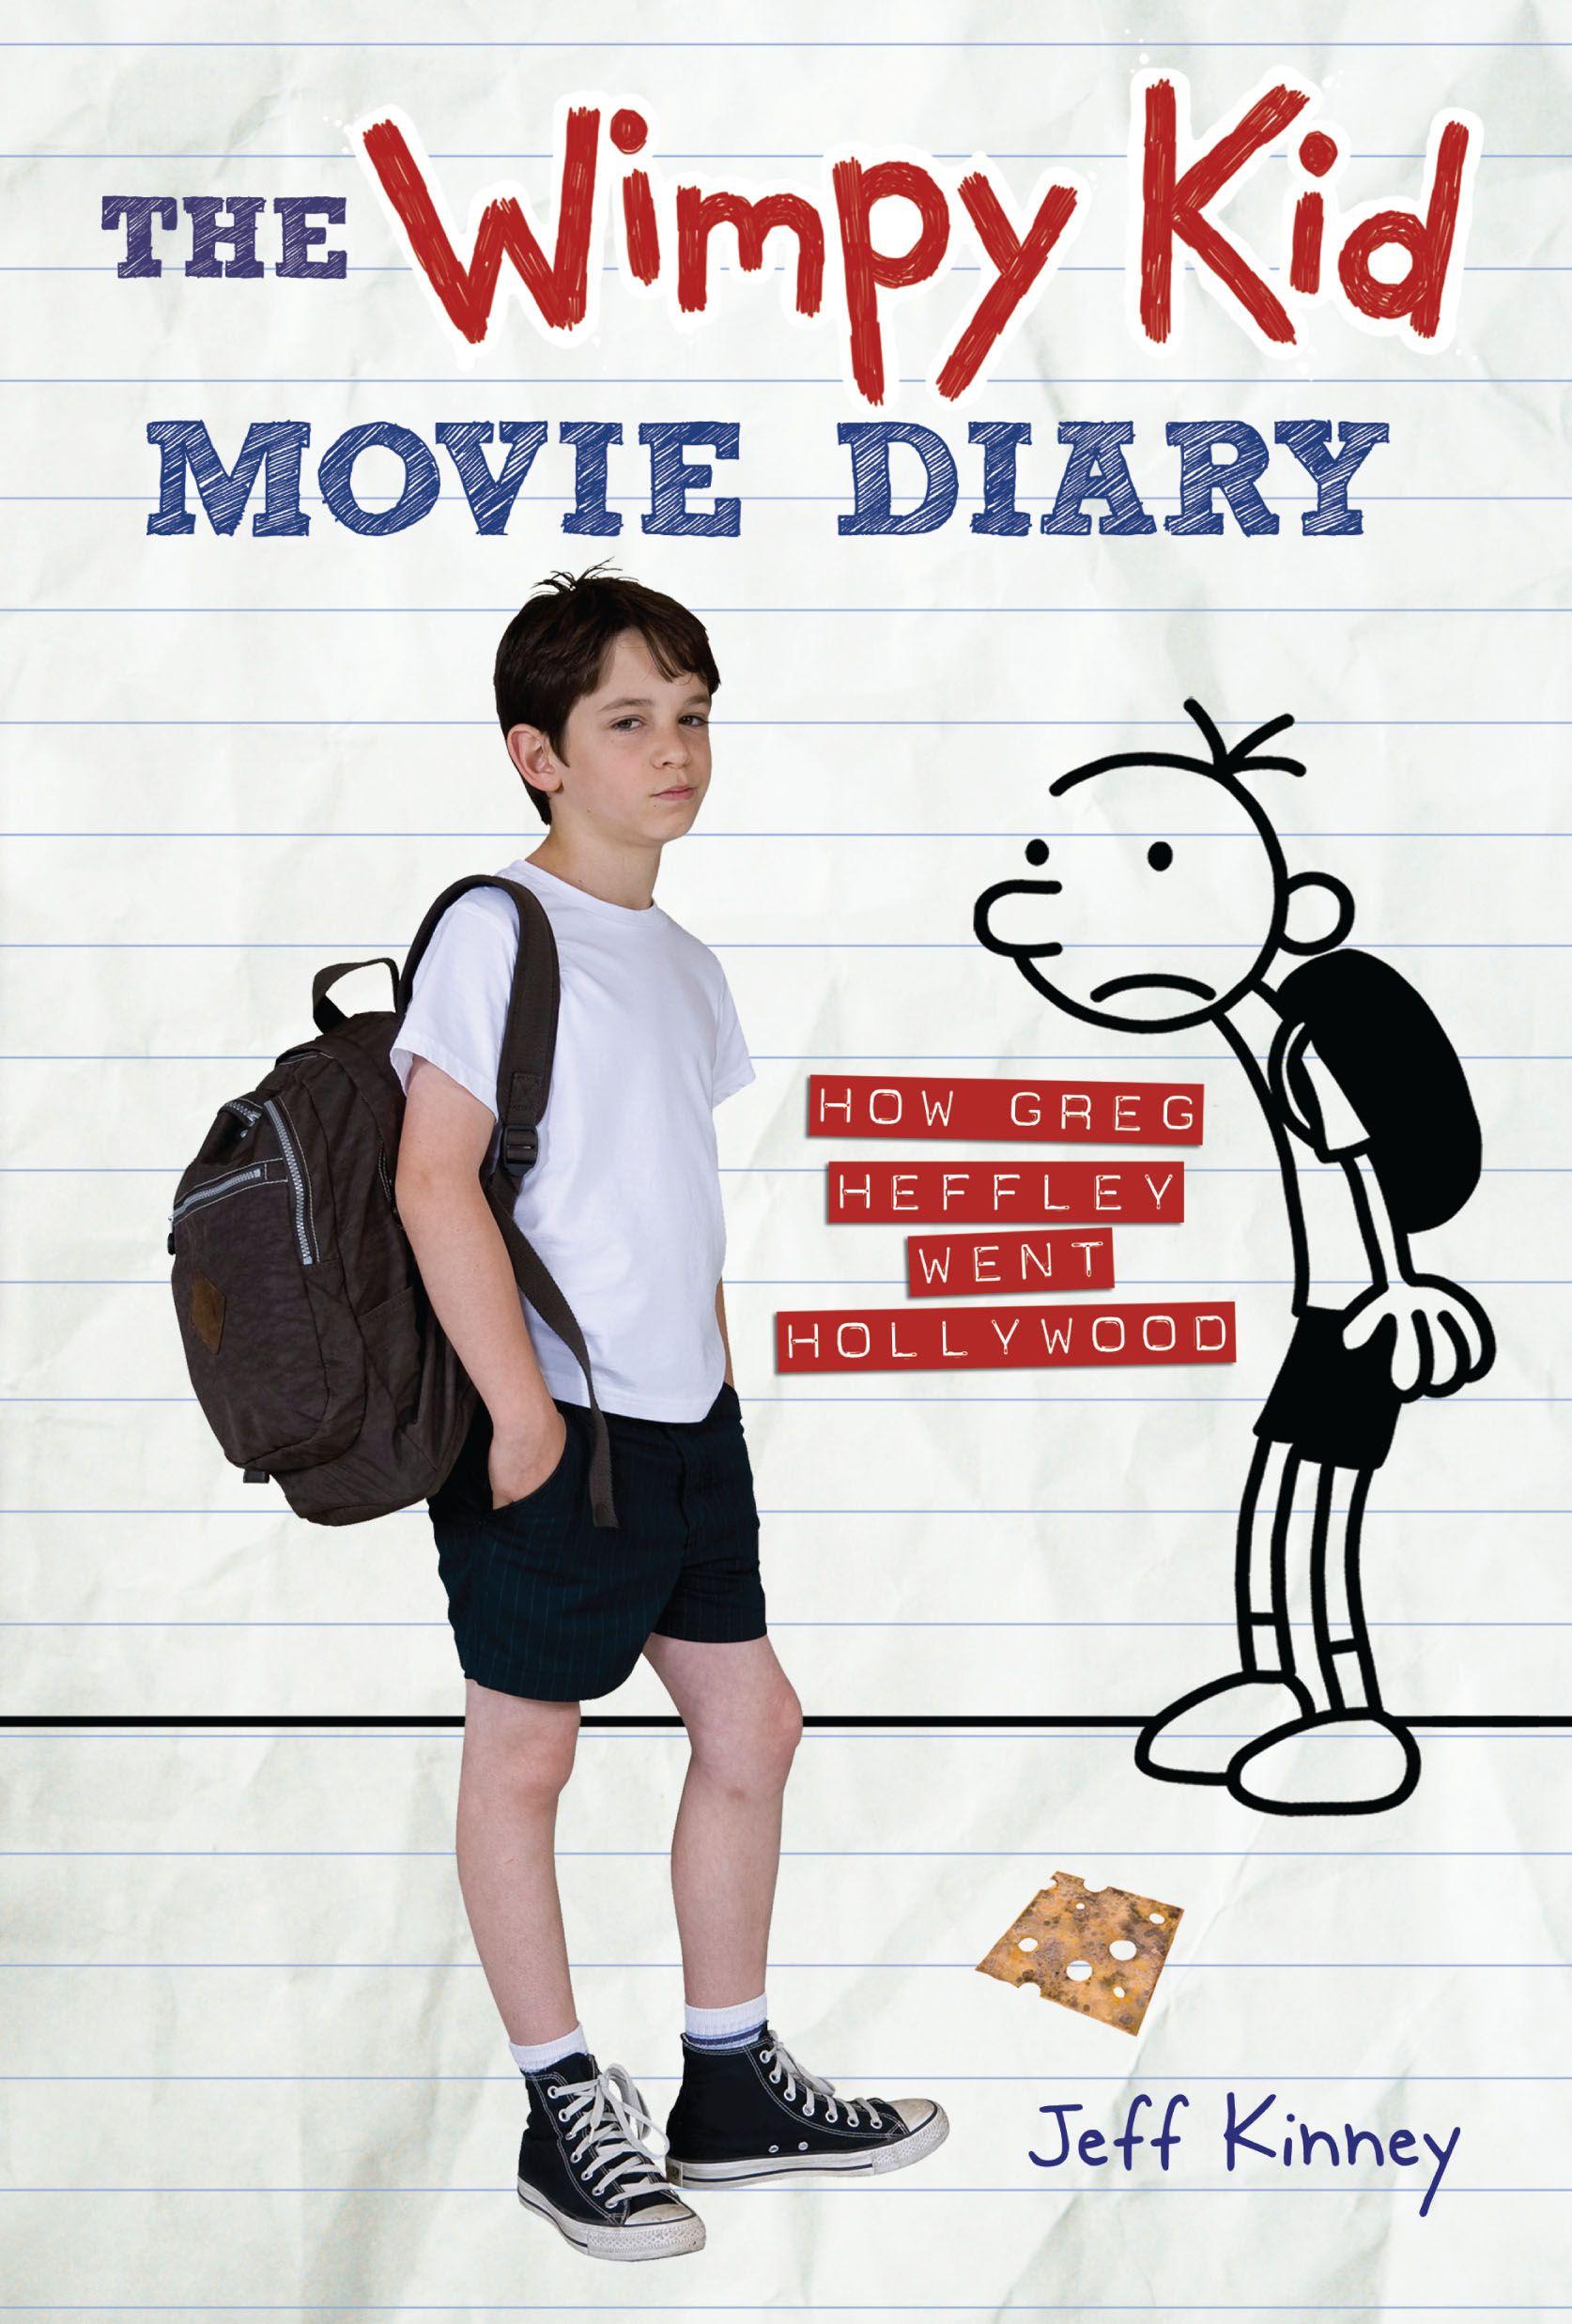 Category:Extra Books in the series. Diary of a Wimpy Kid